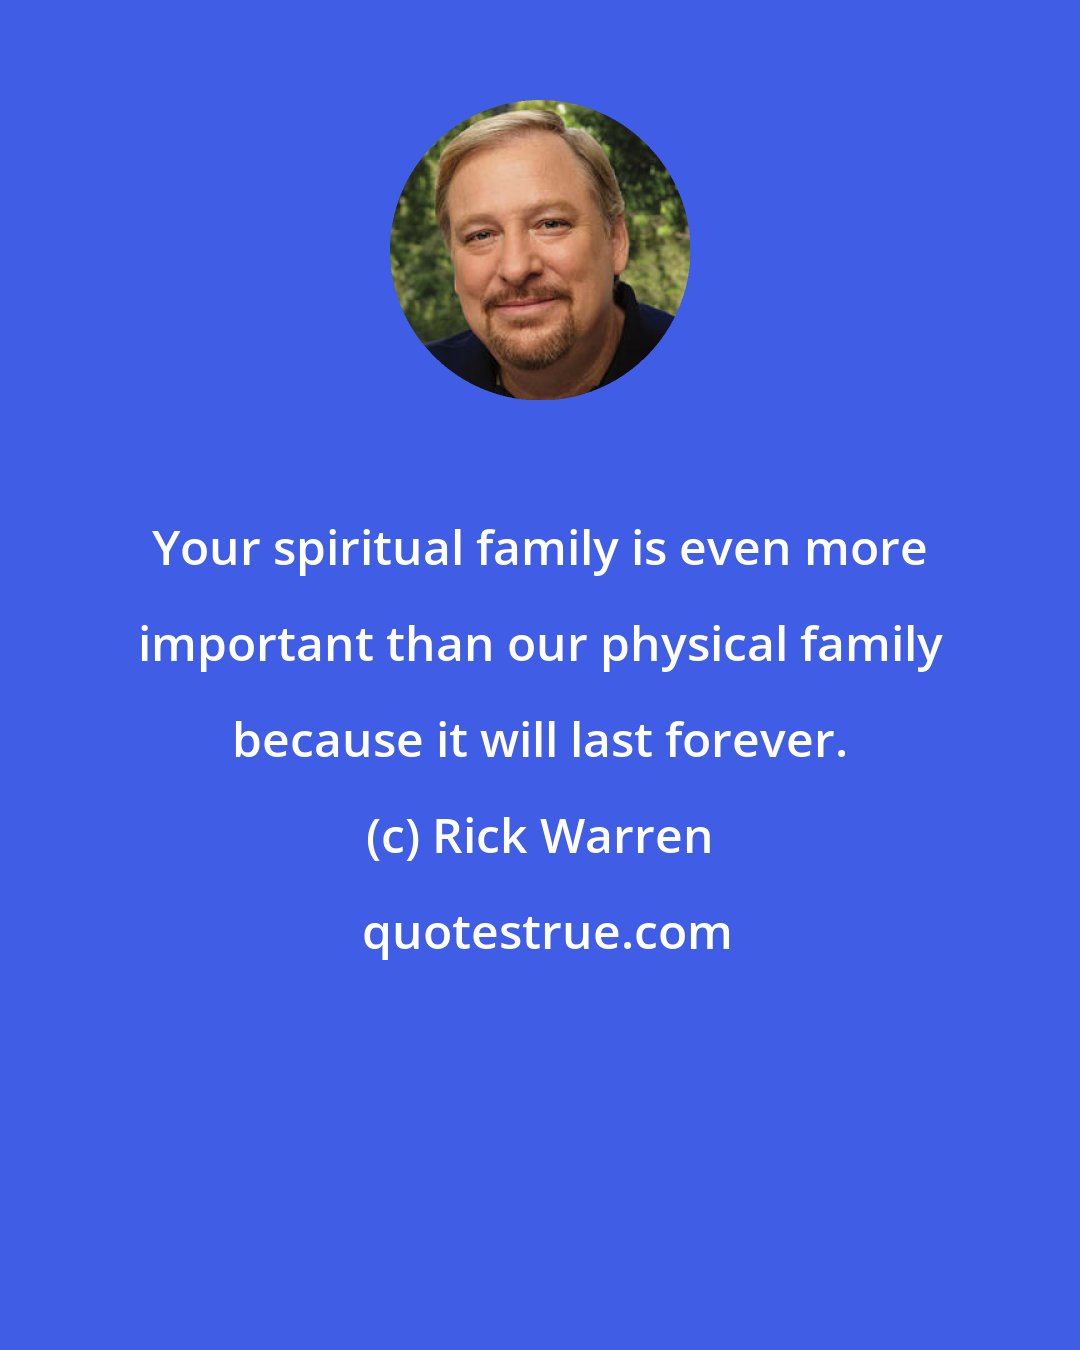 Rick Warren: Your spiritual family is even more important than our physical family because it will last forever.